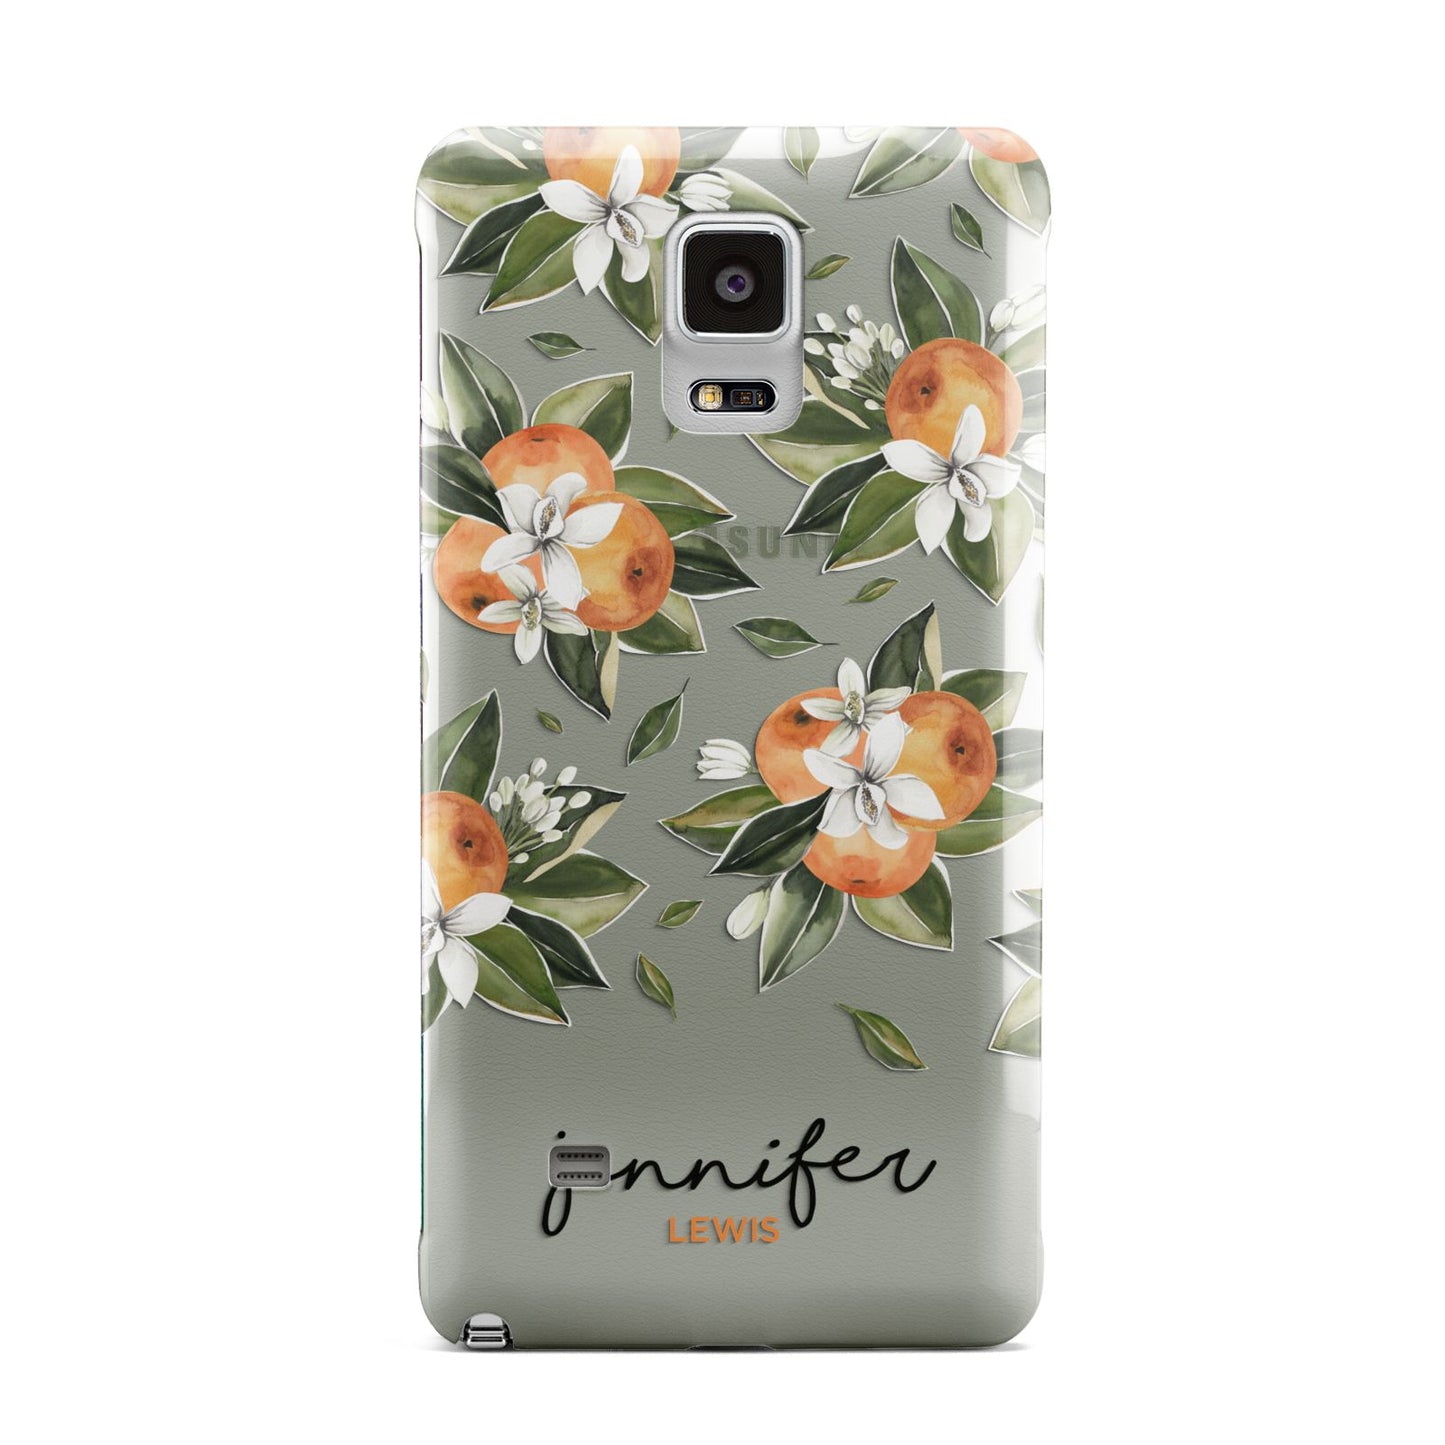 Personalised Bunch of Oranges Samsung Galaxy Note 4 Case